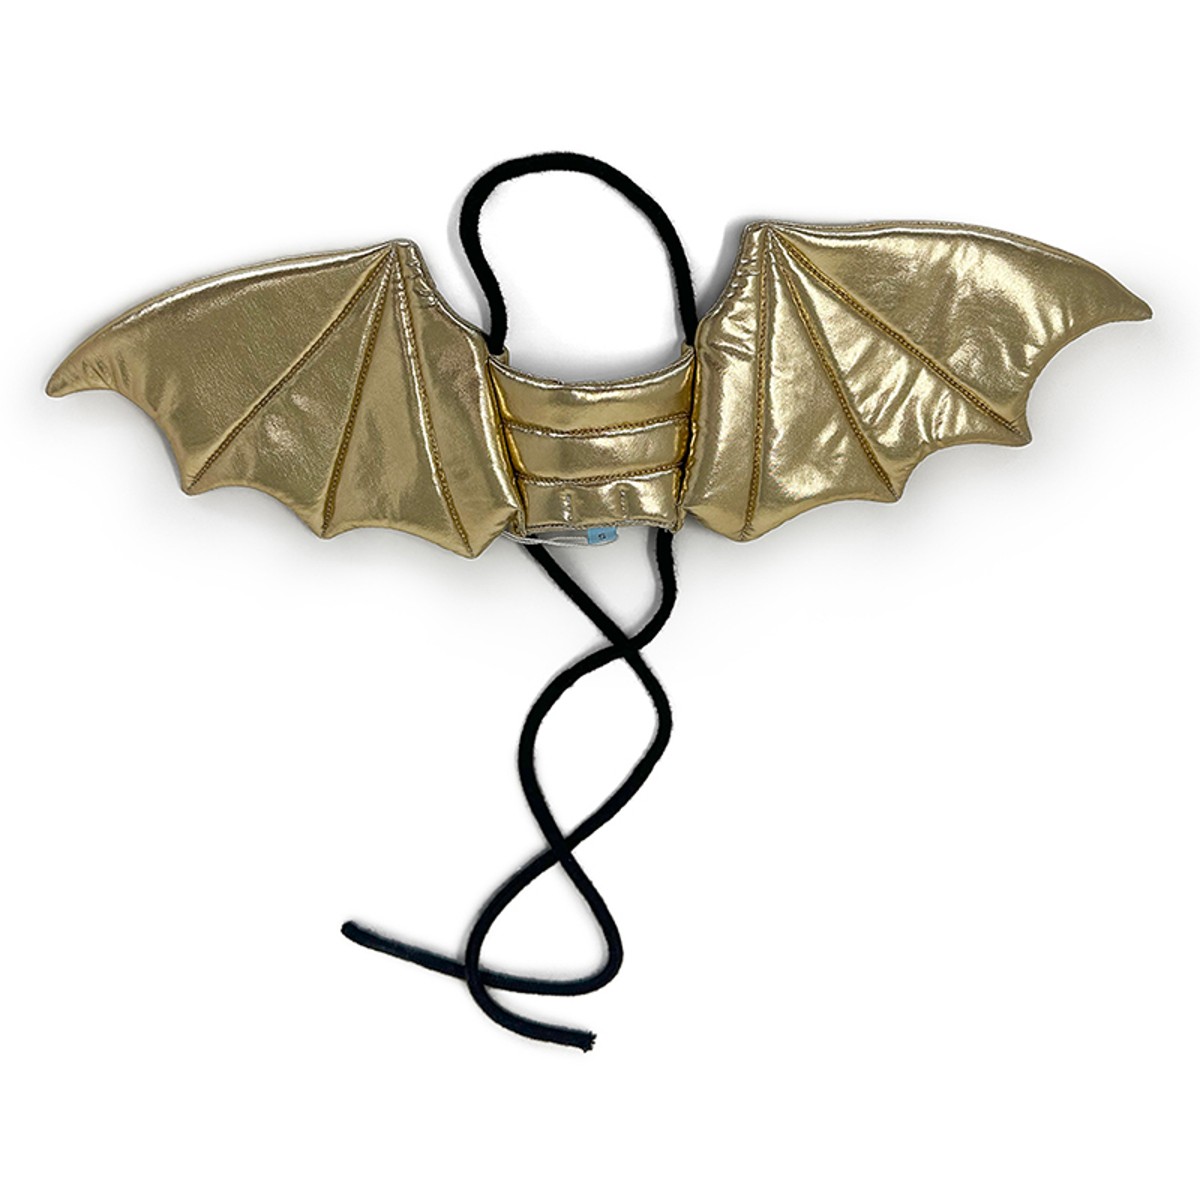 Dragon Wings Dog Costume by Dogo - Gold